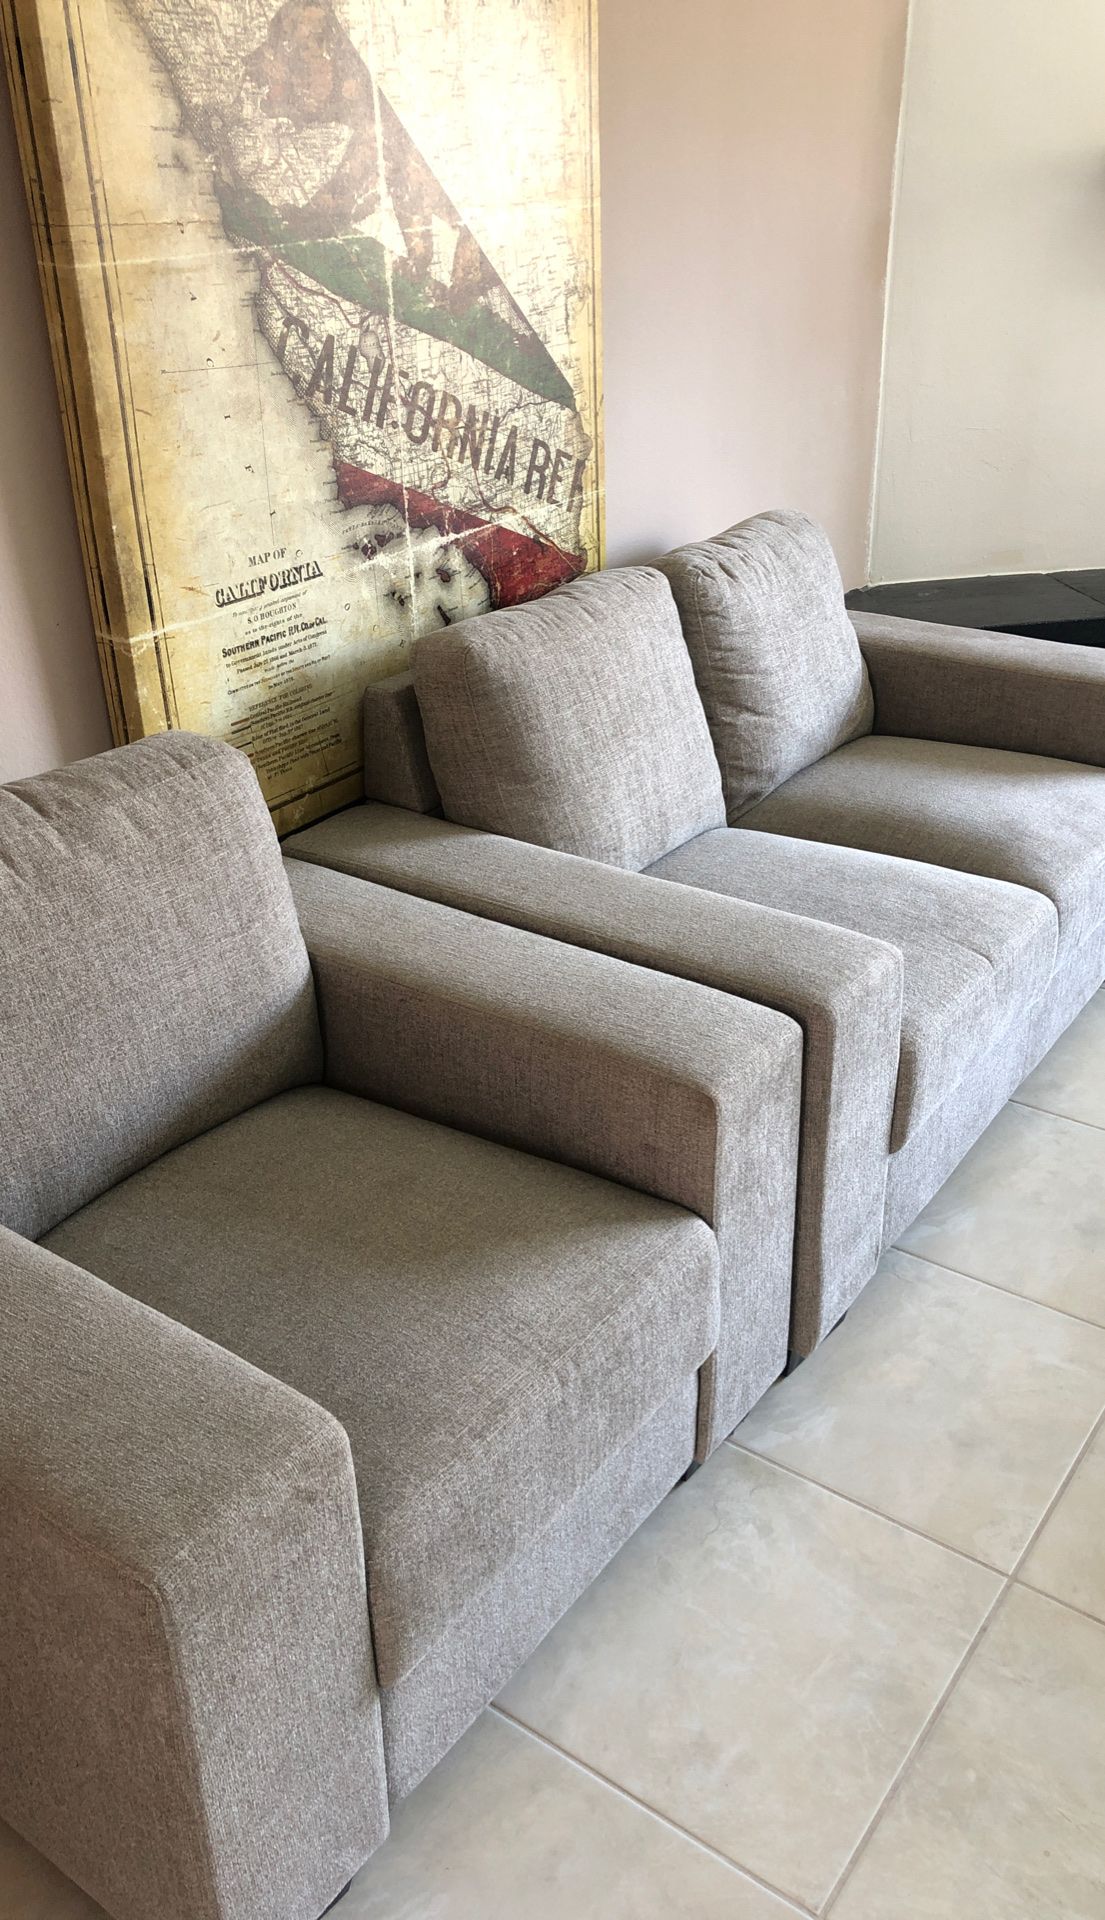 Small couch and chair